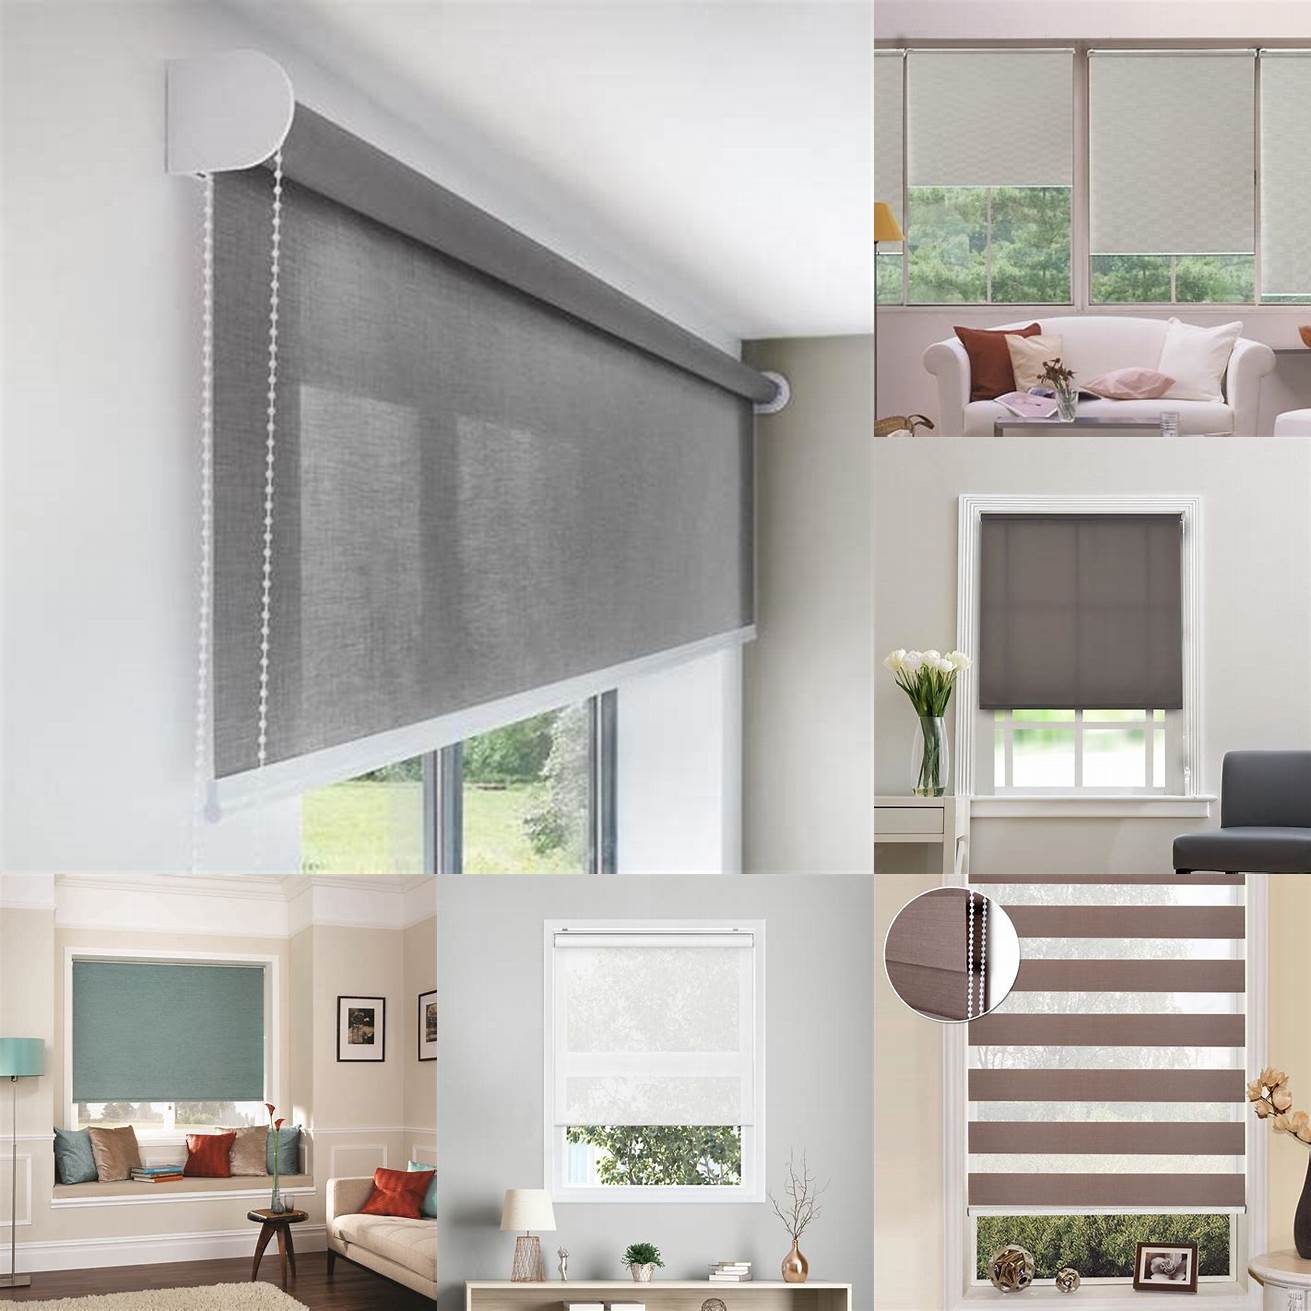 Polyester A popular choice for roller blinds as it is affordable versatile and easy to clean